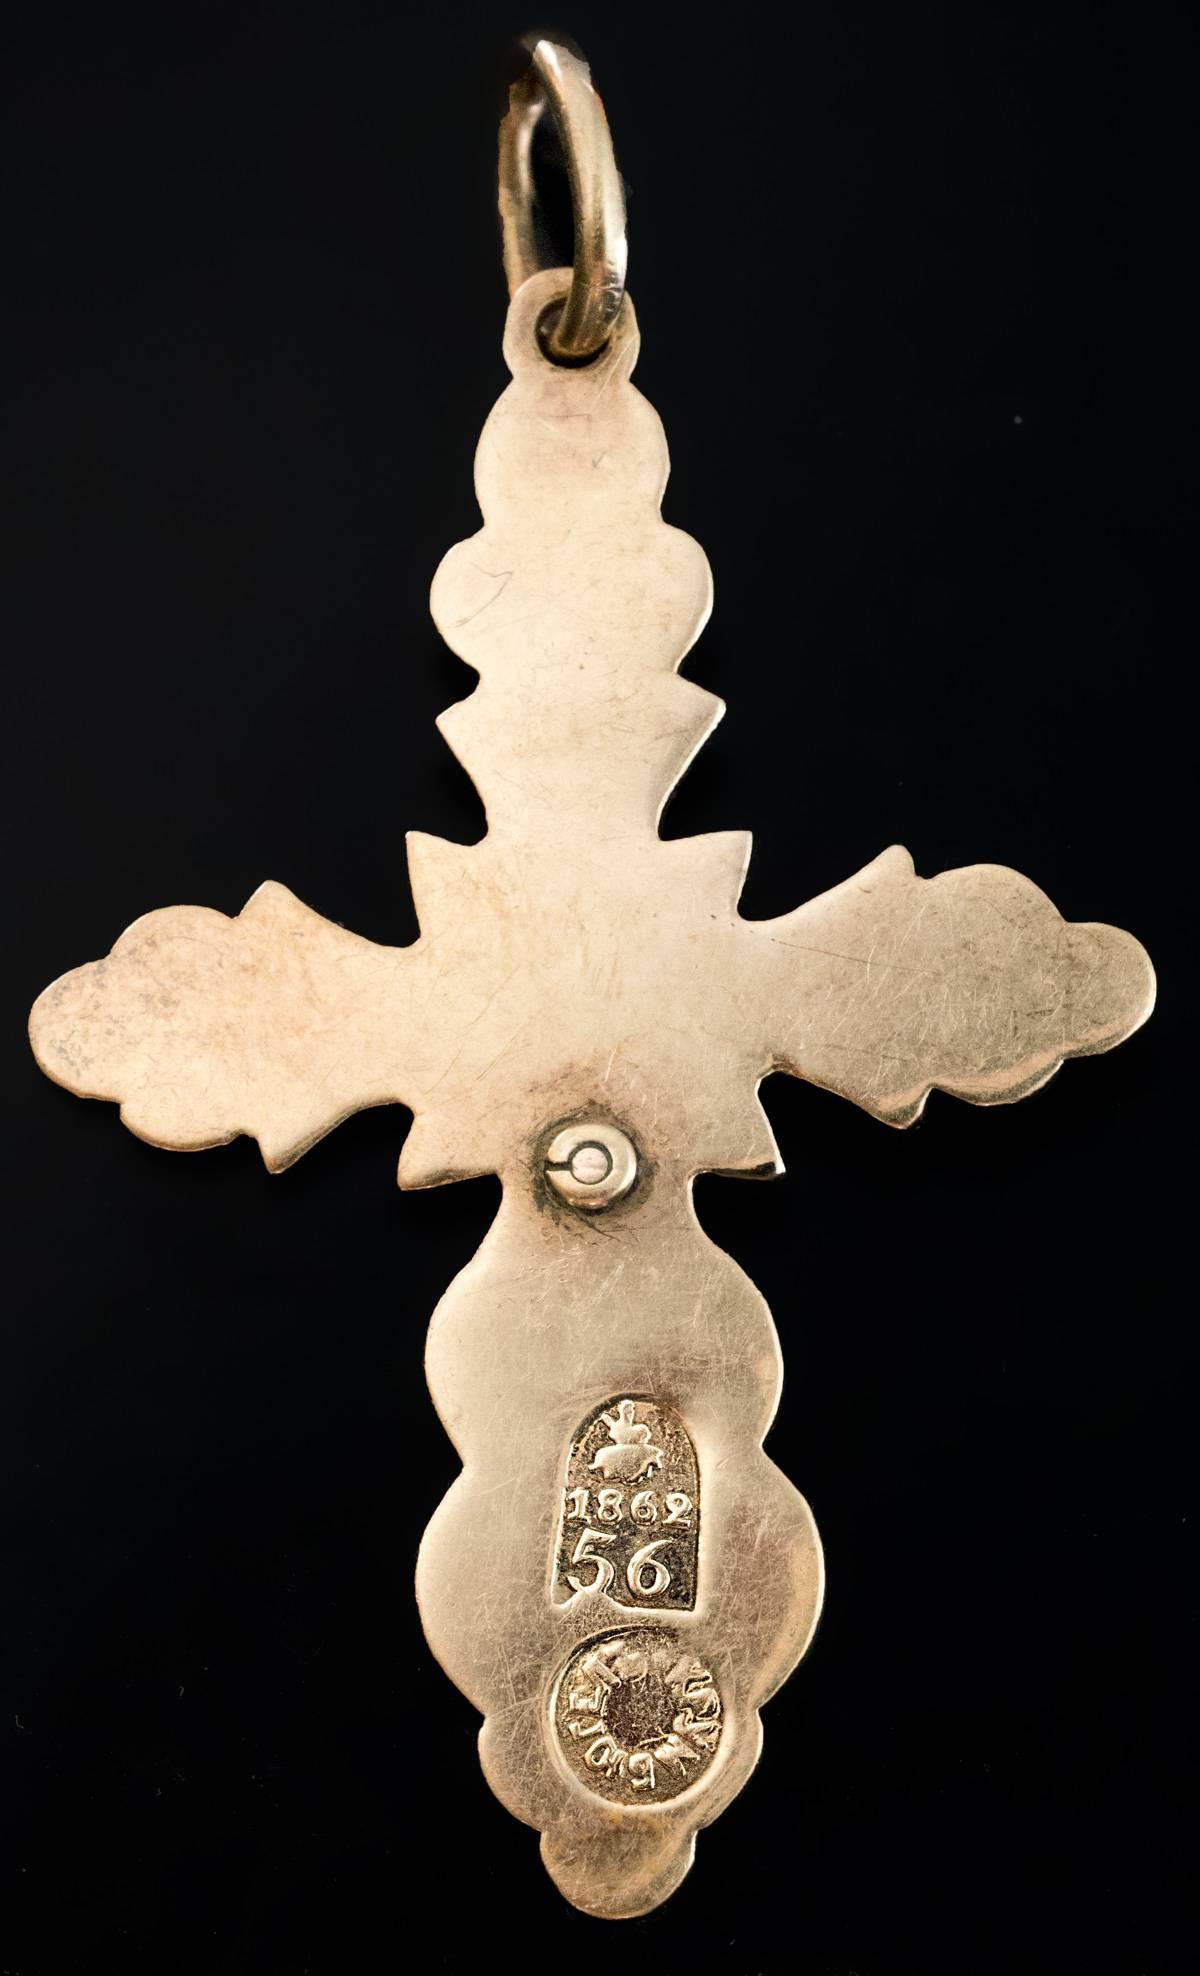 dated 1862

An ornate Russian 14K gold cross pendant with an engine turned wavy pattern.
The cross is stamped on the back with Moscow assay mark for 56 zolotnik gold and maker's mark.

Length without suspension ring  43 mm (1 6/8 in.)